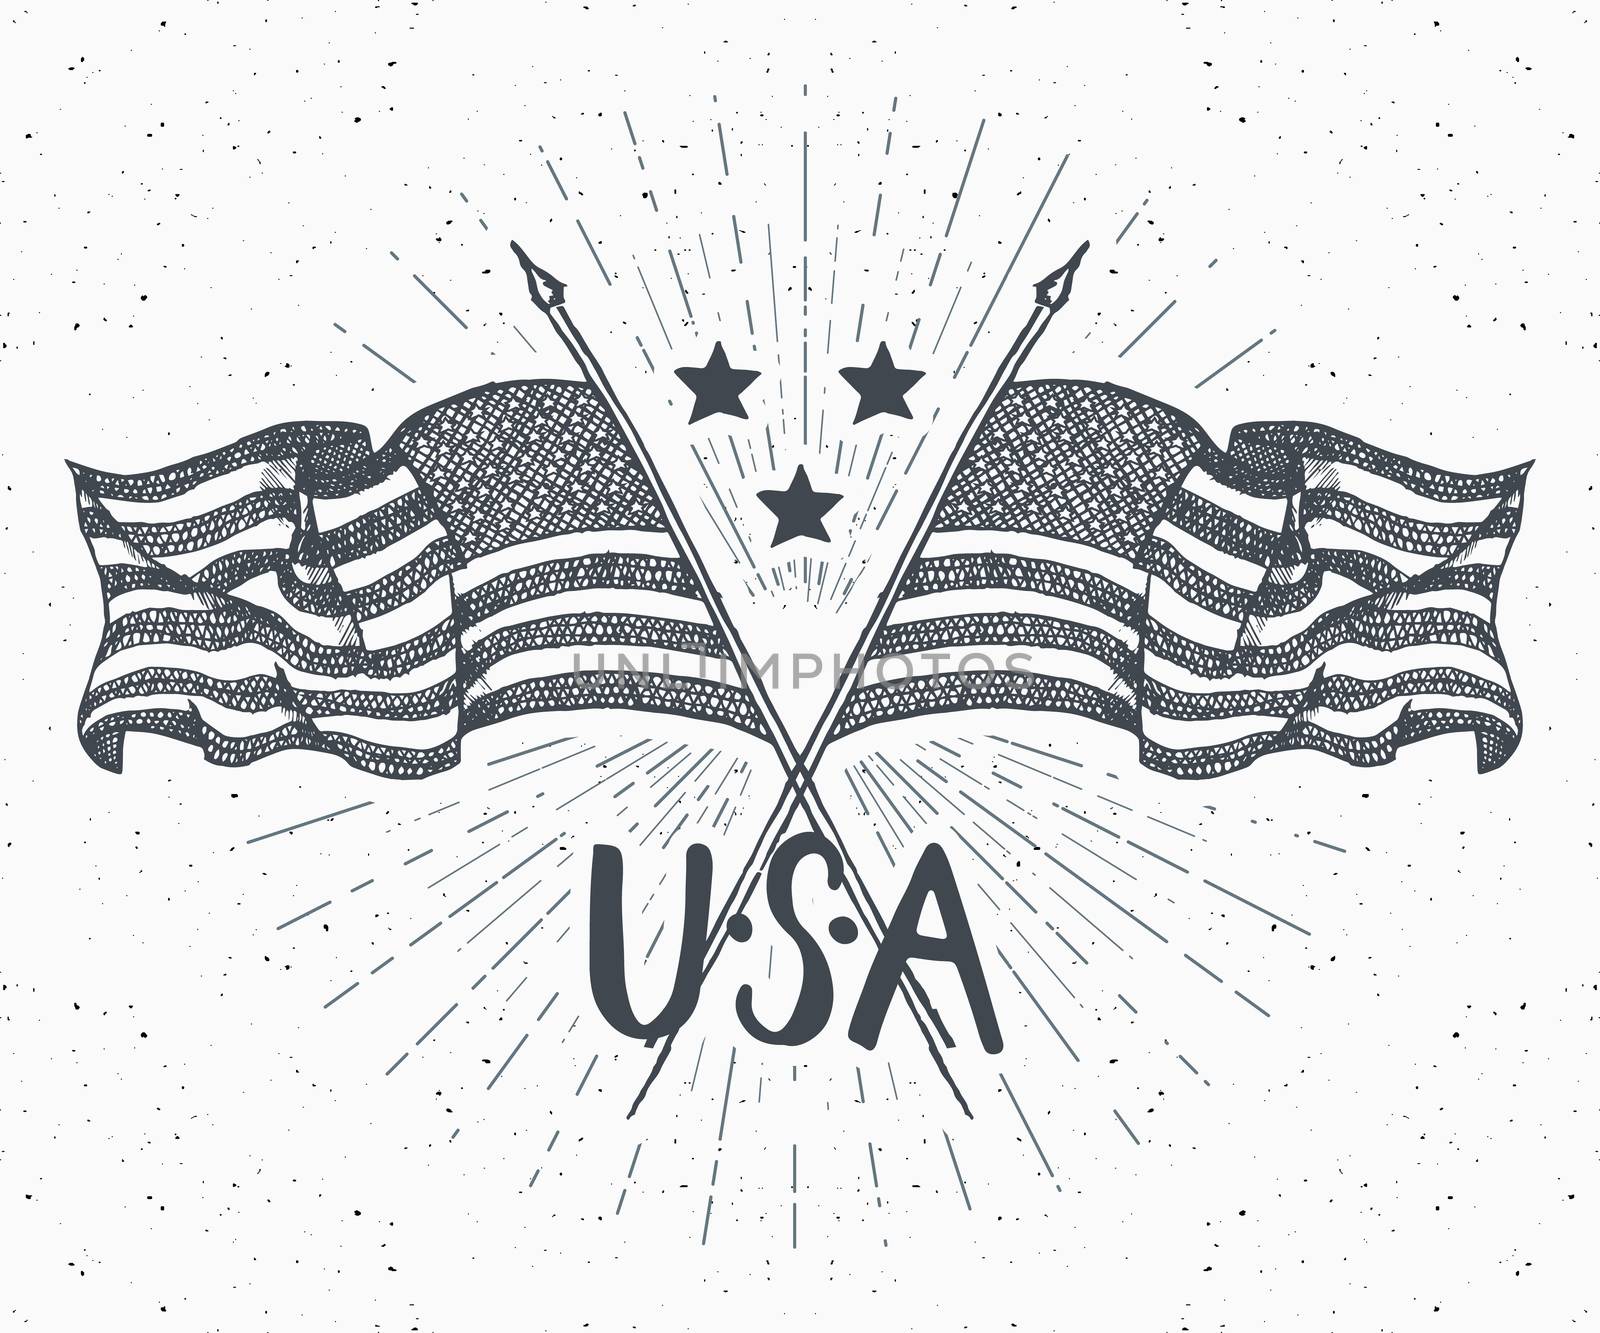 Vintage label, Hand drawn crossed USA flags, Happy Independence Day, fourth of july celebration, greeting card, grunge textured retro badge, typography design vector illustration by Lemon_workshop